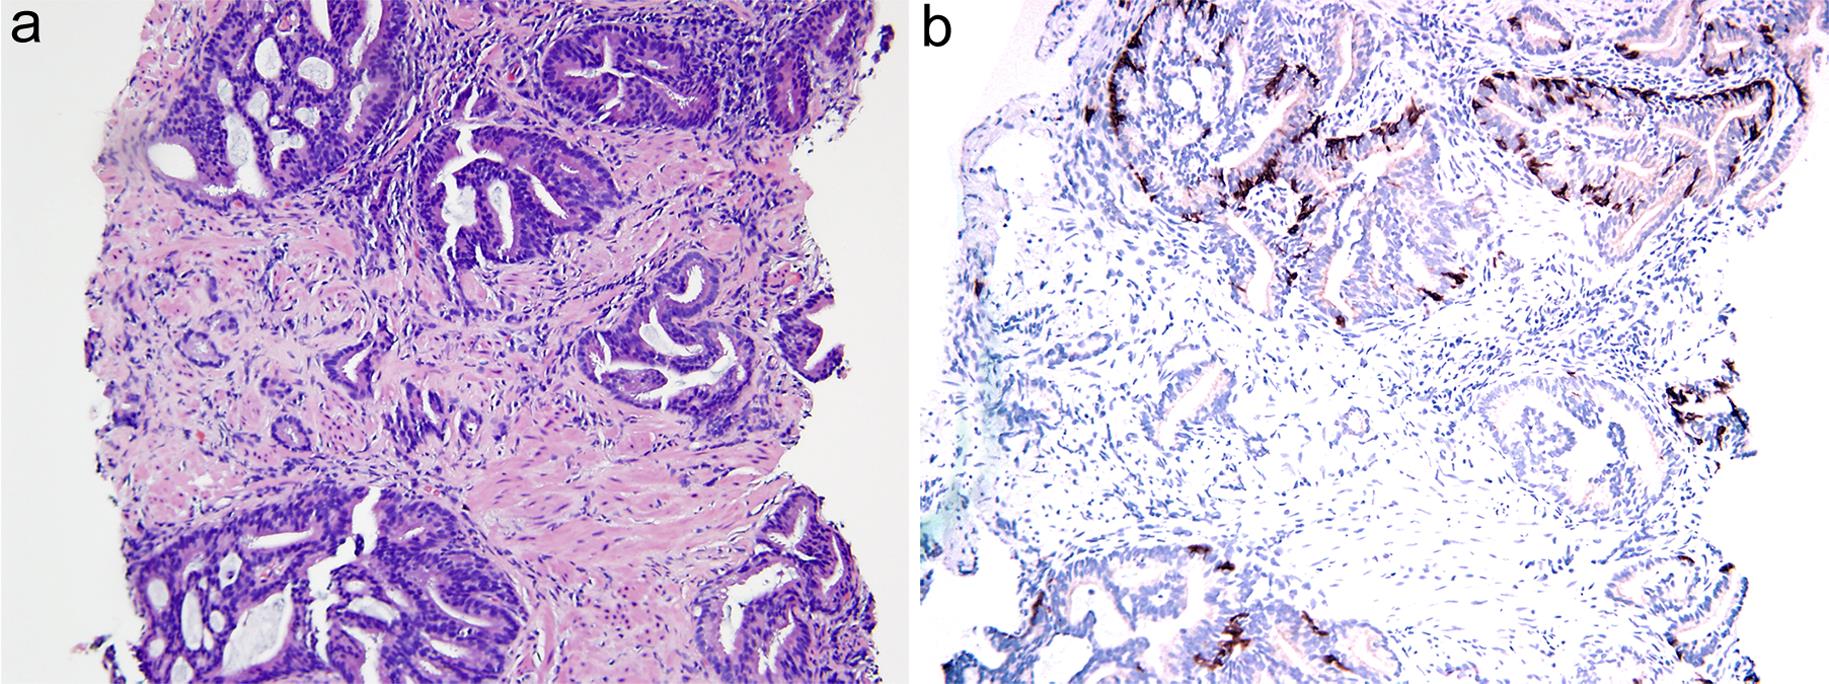 IDC coexists with acinar adenocarcinoma (a) (×100). On immunostain, IDC is positive for racemase and CK903 and p63, while acinar carcinoma is positive for racemase and negative for CK903 and p63 (b) (×100). Per the GUPS guidelines, the Gleason score is graded as 6 (3 + 3) with IDC, as IDC is not included in the Gleason score. Per the ISUP guidelines, the Gleason score is graded as 7 (4 + 3) with IDC, as IDC is included in the Gleason score.